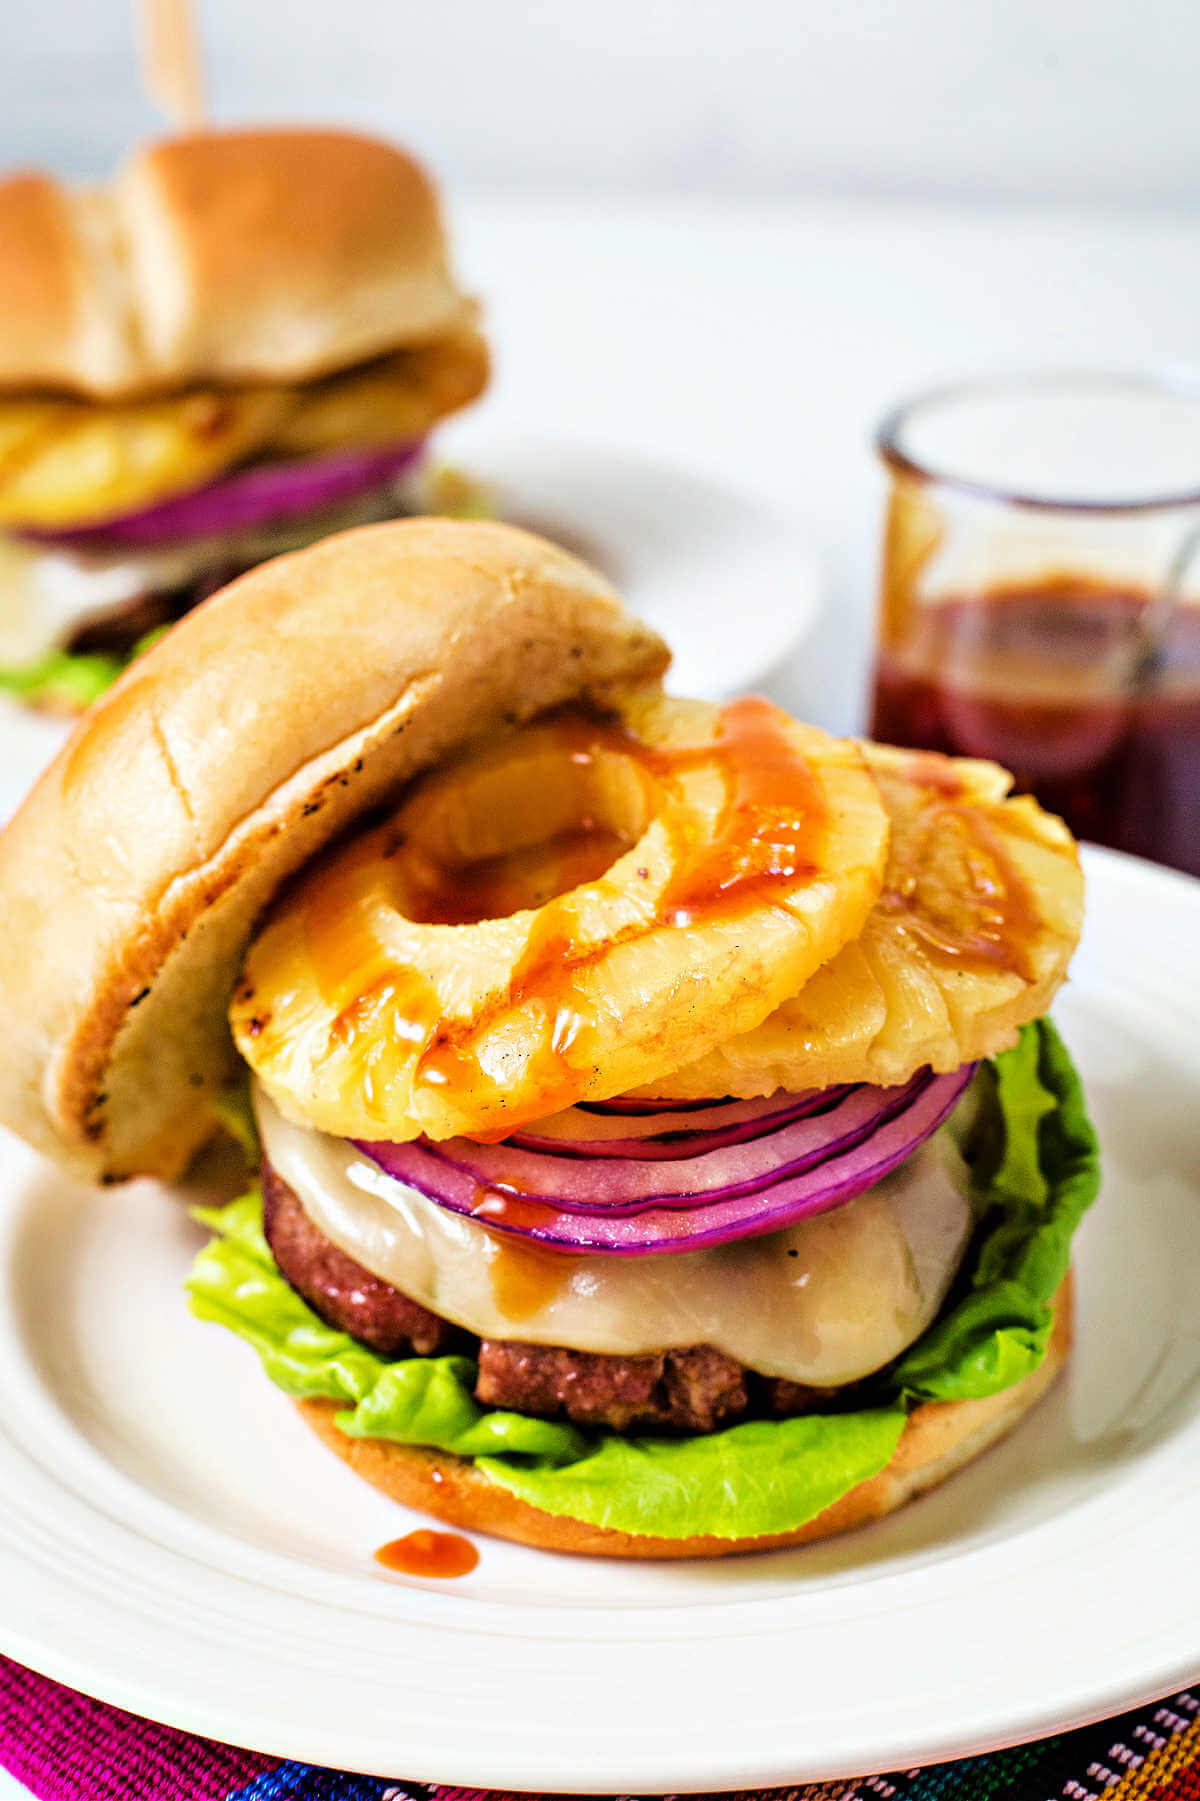 an open face hawaiian burger with provolone cheese, grilled pineapple, and red onion and drizzled with sauce on a plate.